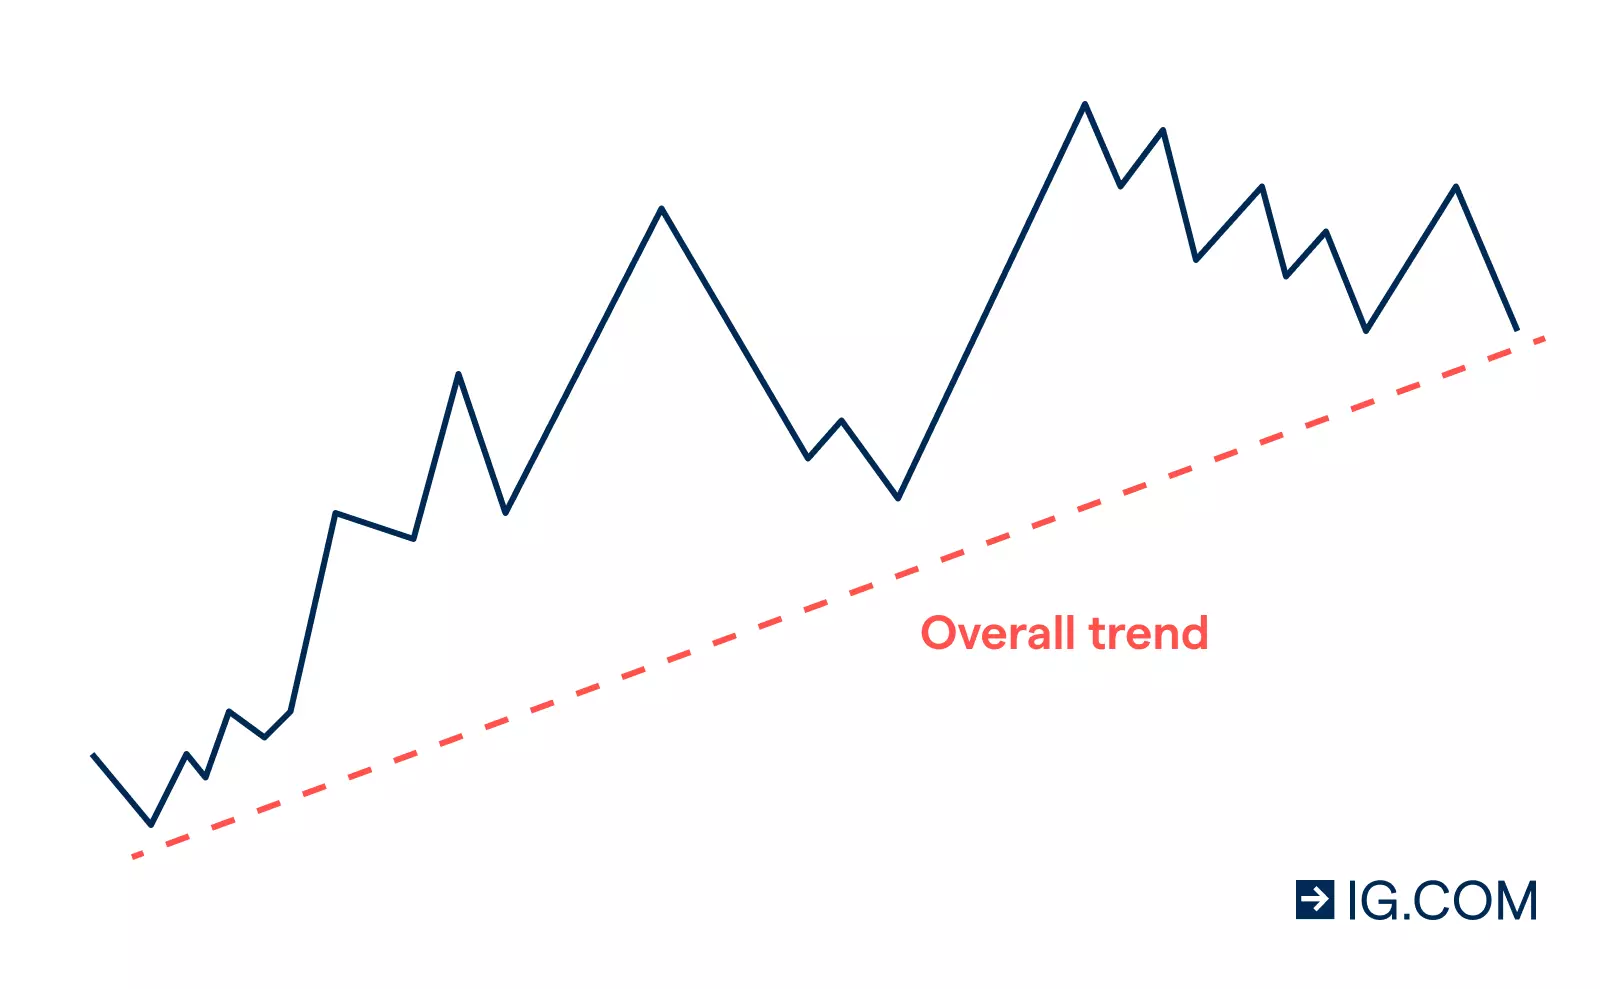 Example of a trend in trading